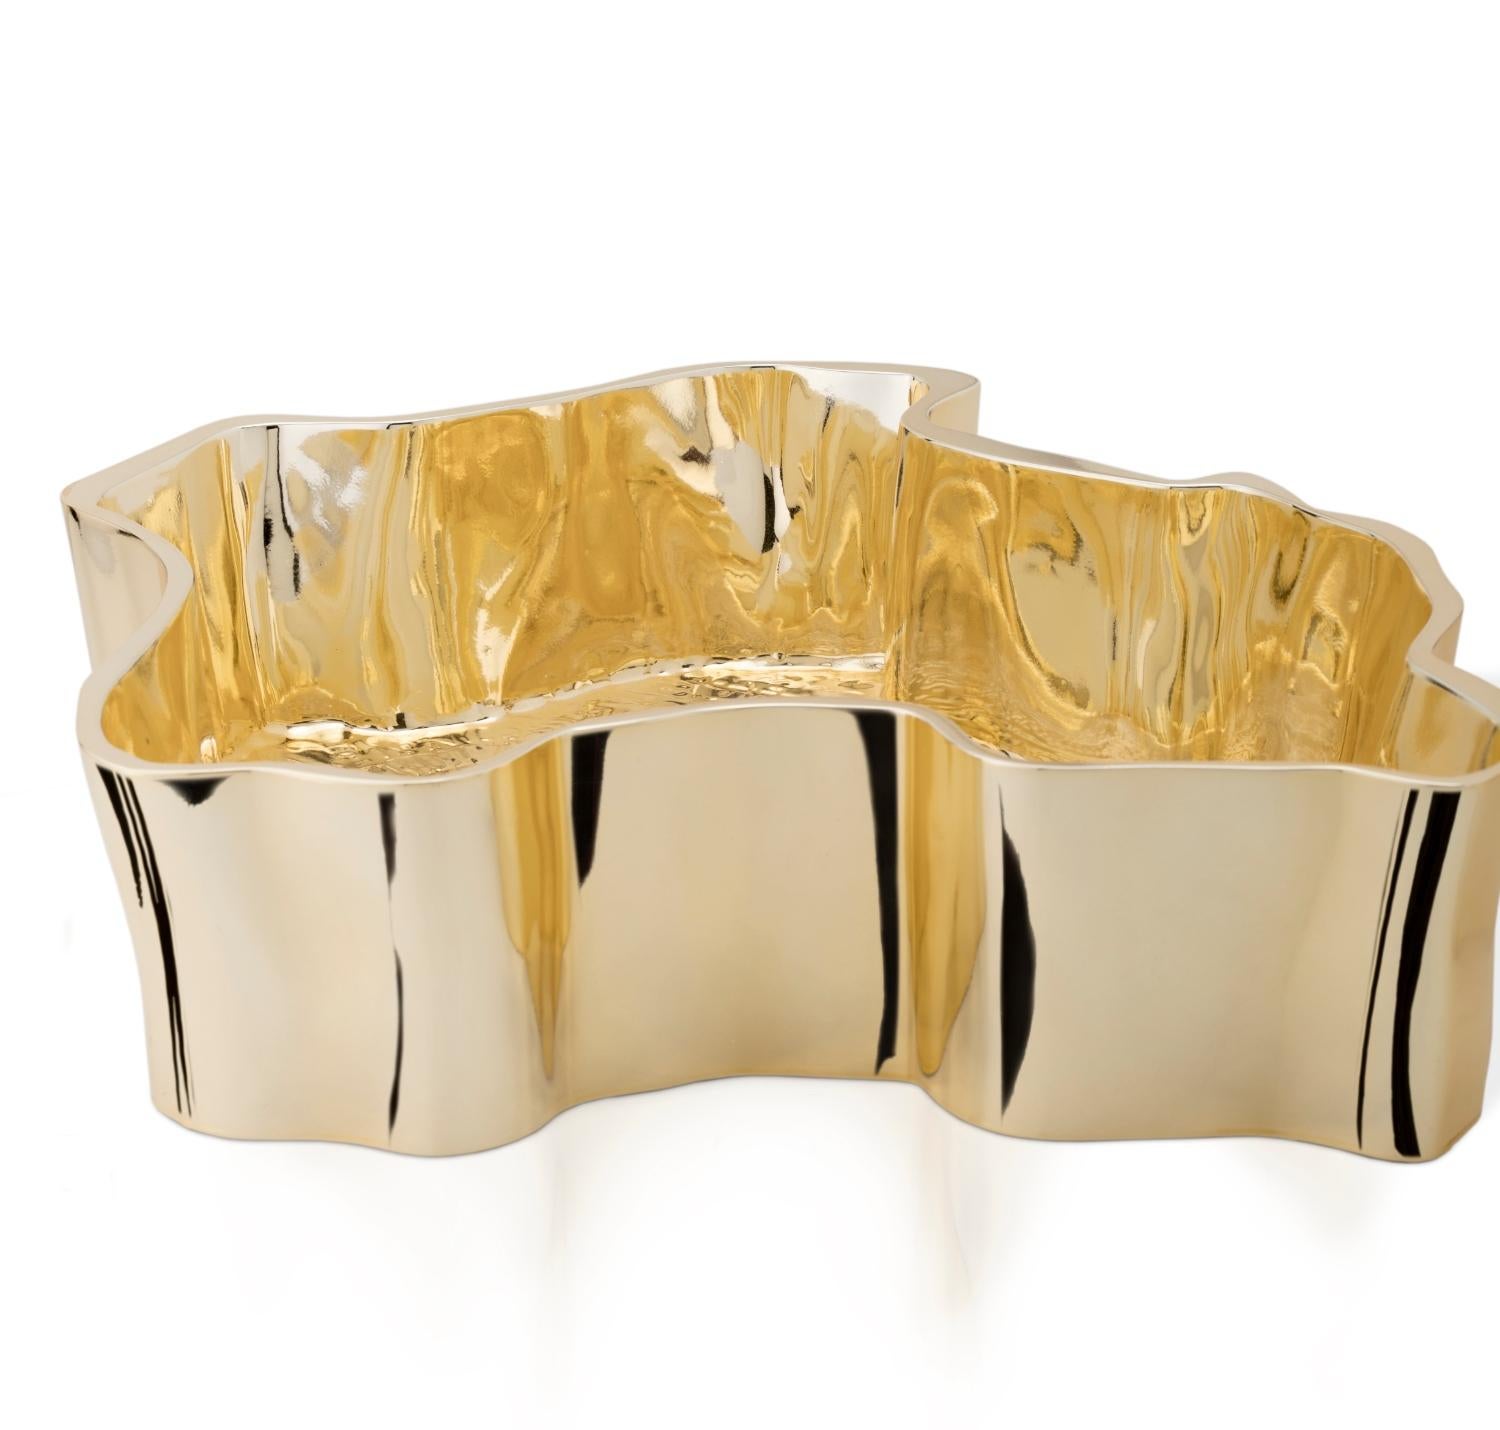 Modern Eden In Gold-Plated Vessel Sink by Maison Valentina

A Modern Eden in Gold-Plated Vessel Sink by Maison Valentina, a vessel sink inspired by the shape of a tree stump, this amazing organically shaped sink is made of casted aluminum and